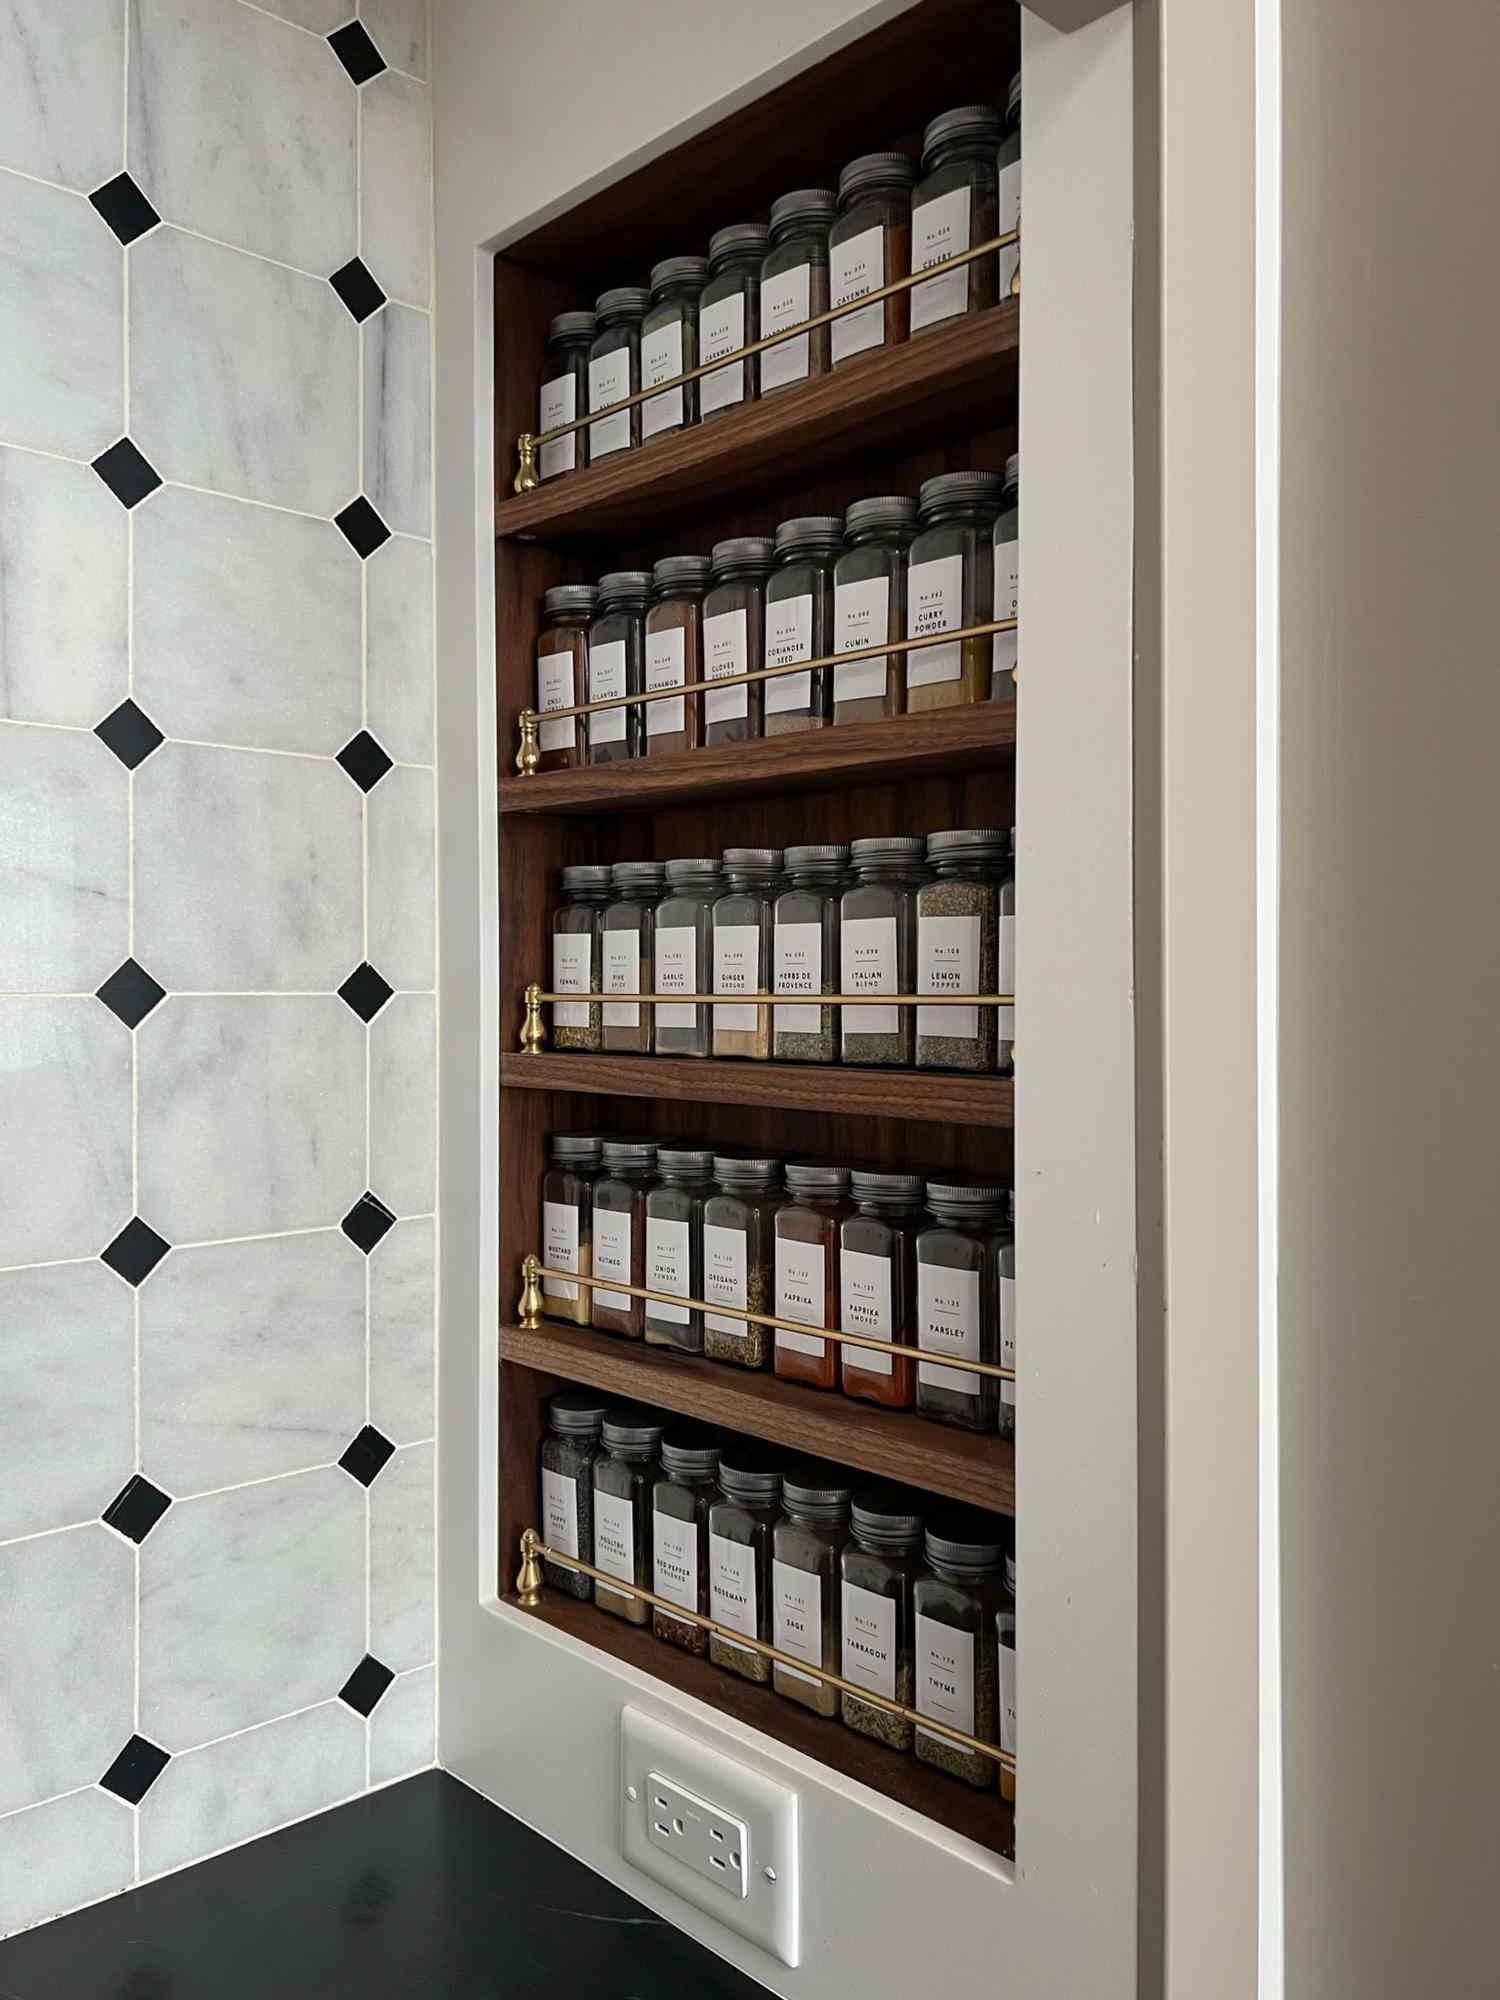 A DIY spice rack made out of wood and brass